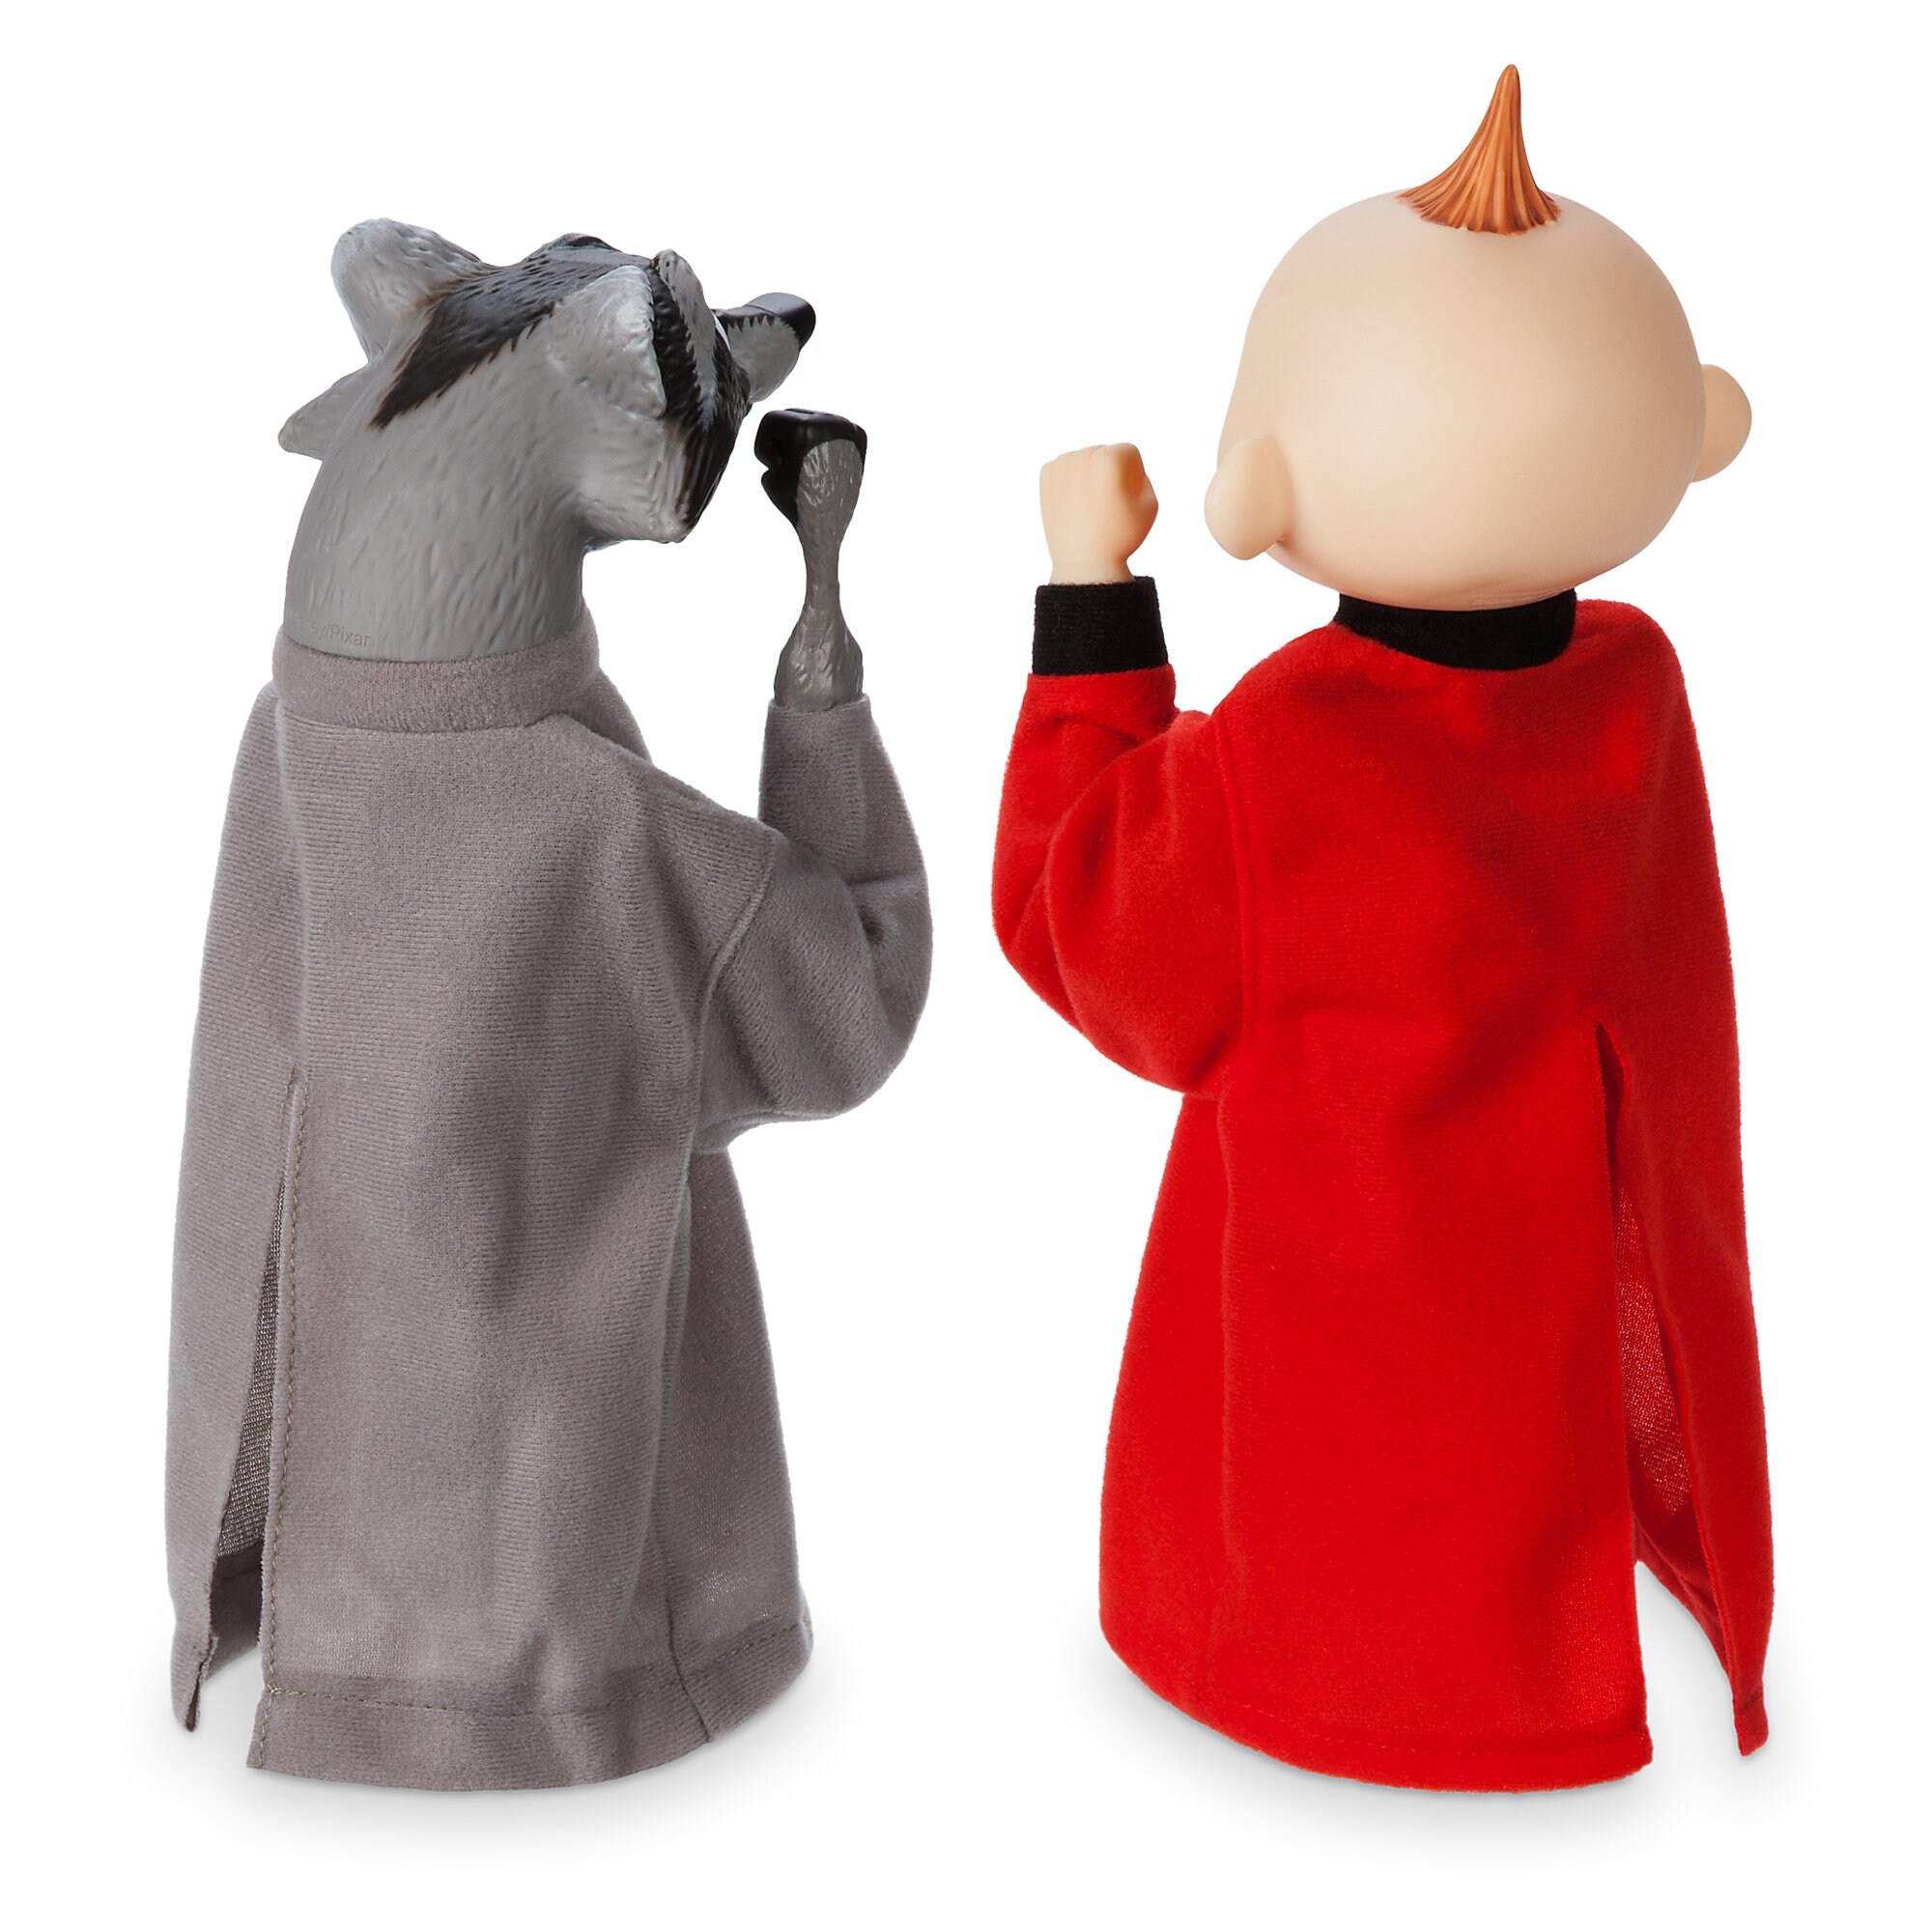 Jack-Jack and Raccoon Boxing Puppet Set - Incredibles 2